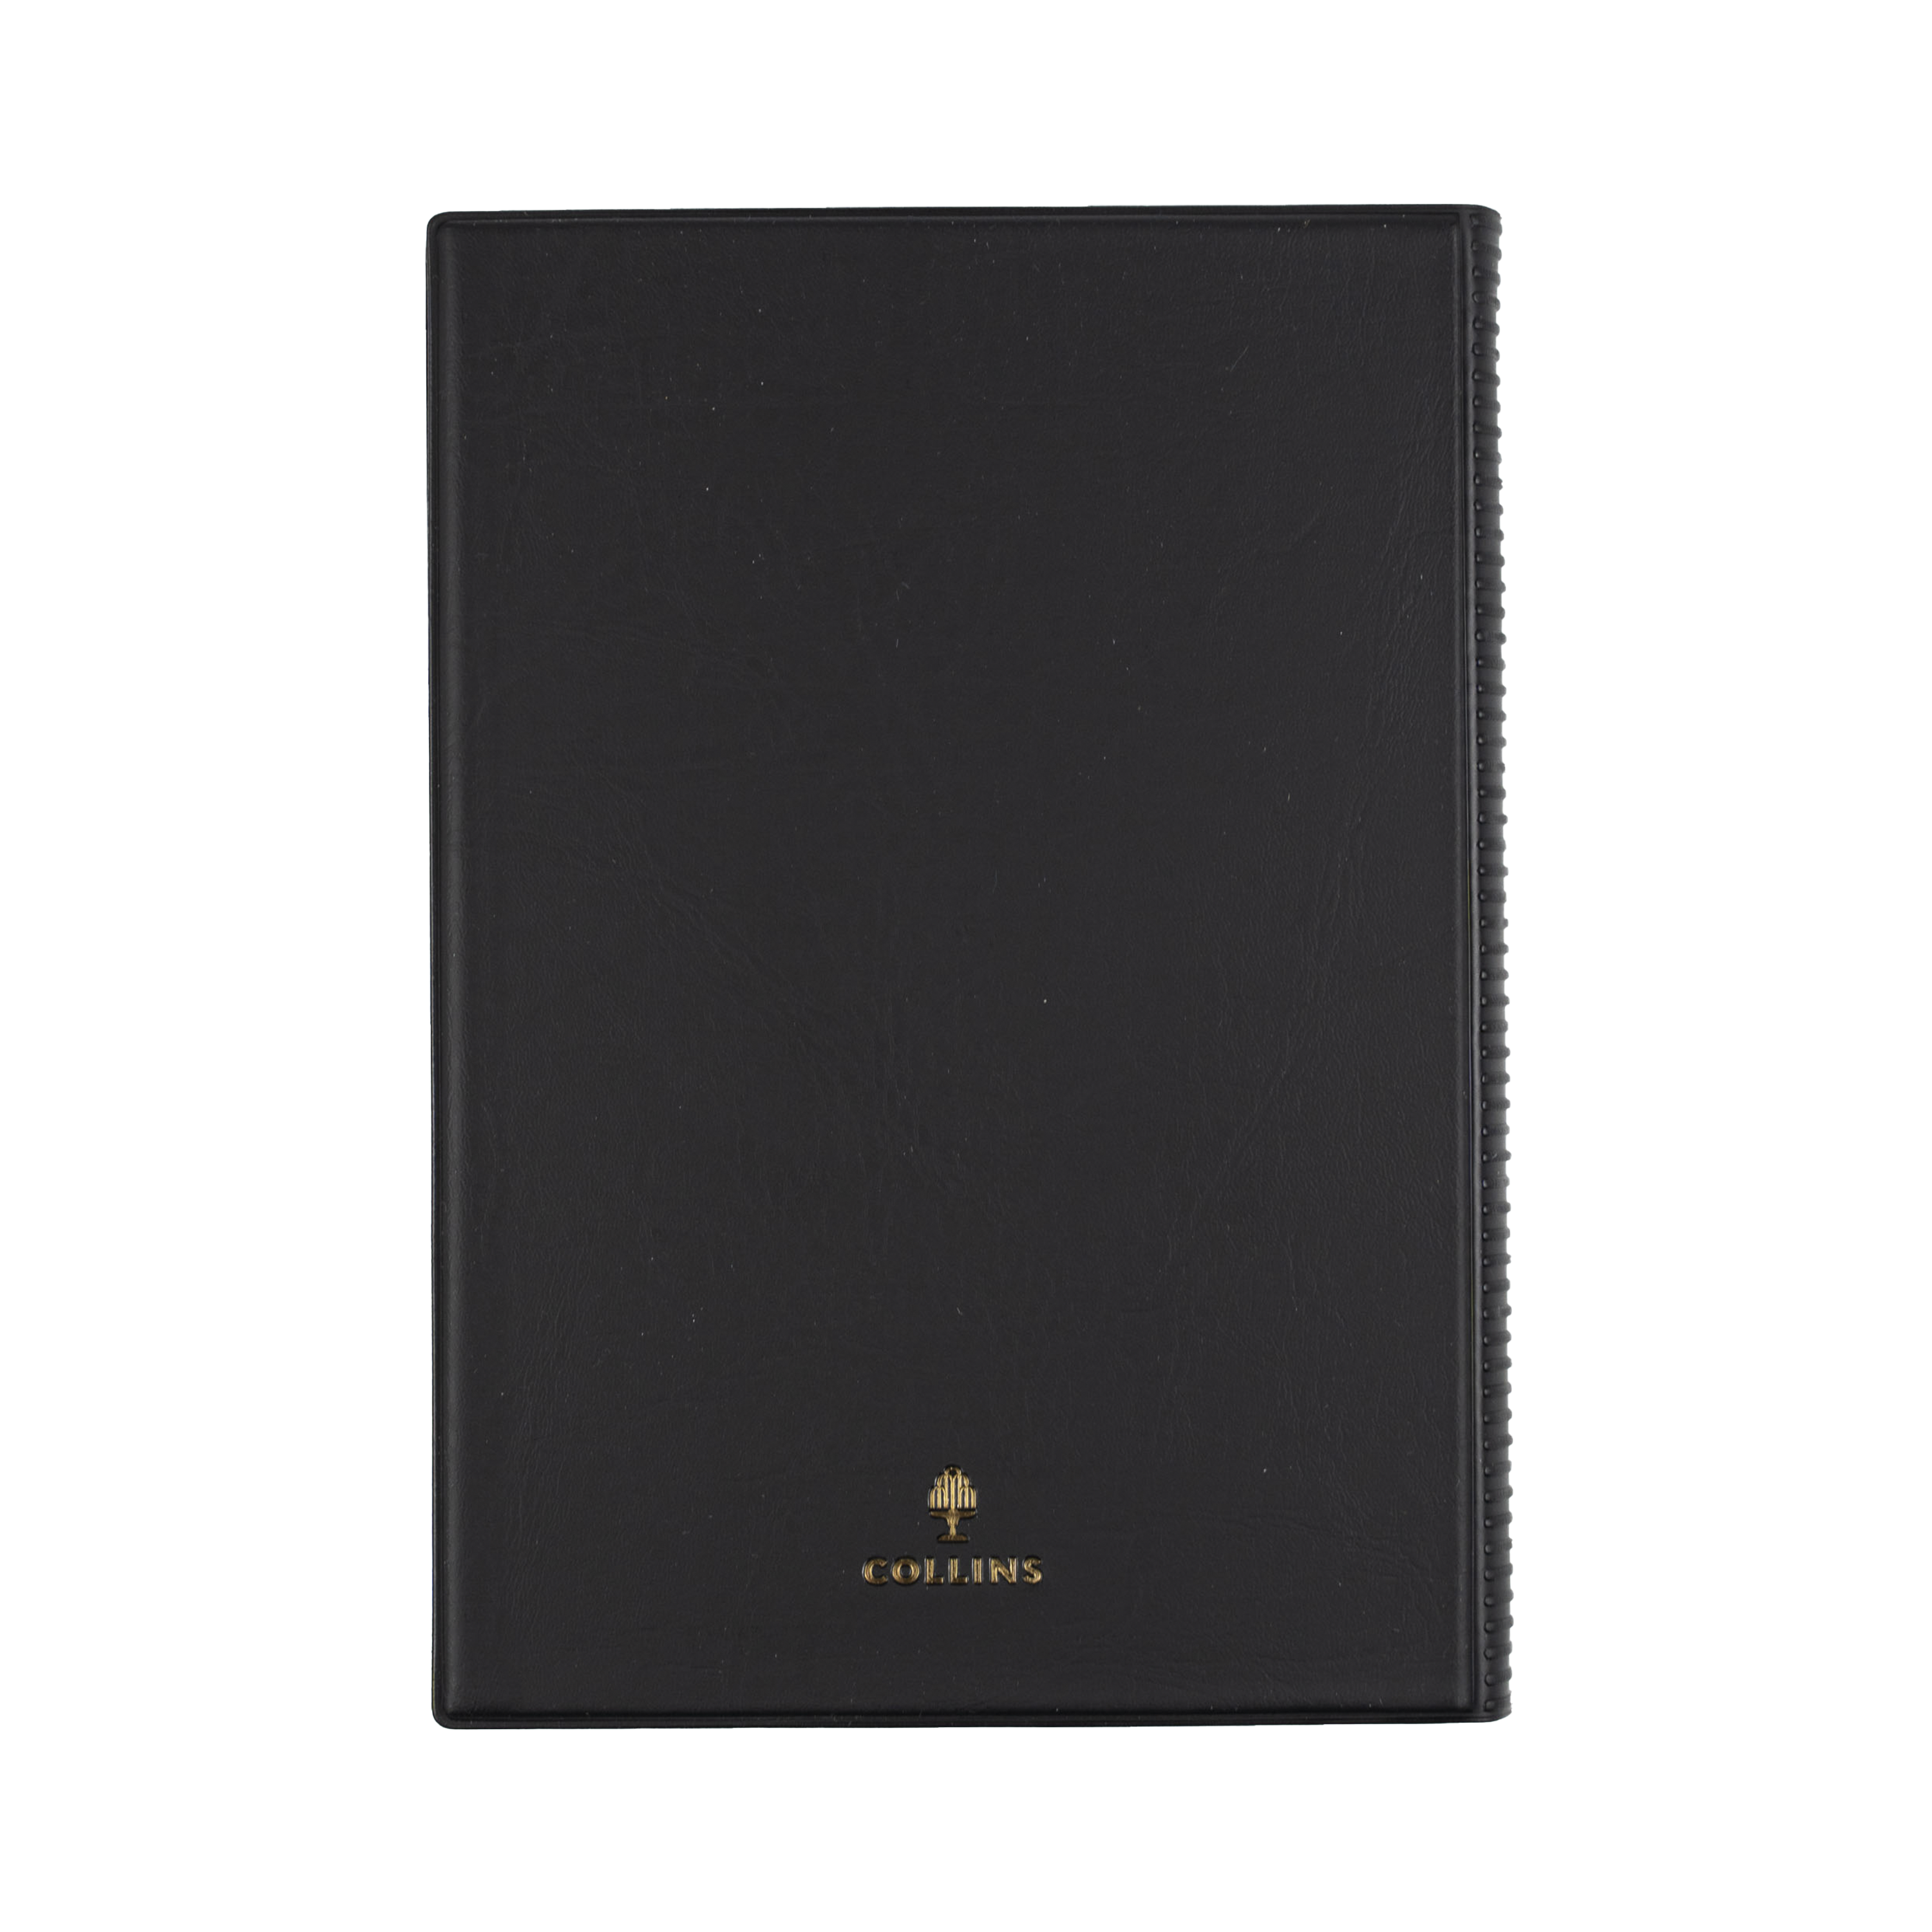 Belmont Desk 2024 Diary - 2 Days to a Page, Size A5 Black / A5 (210 x 148mm)